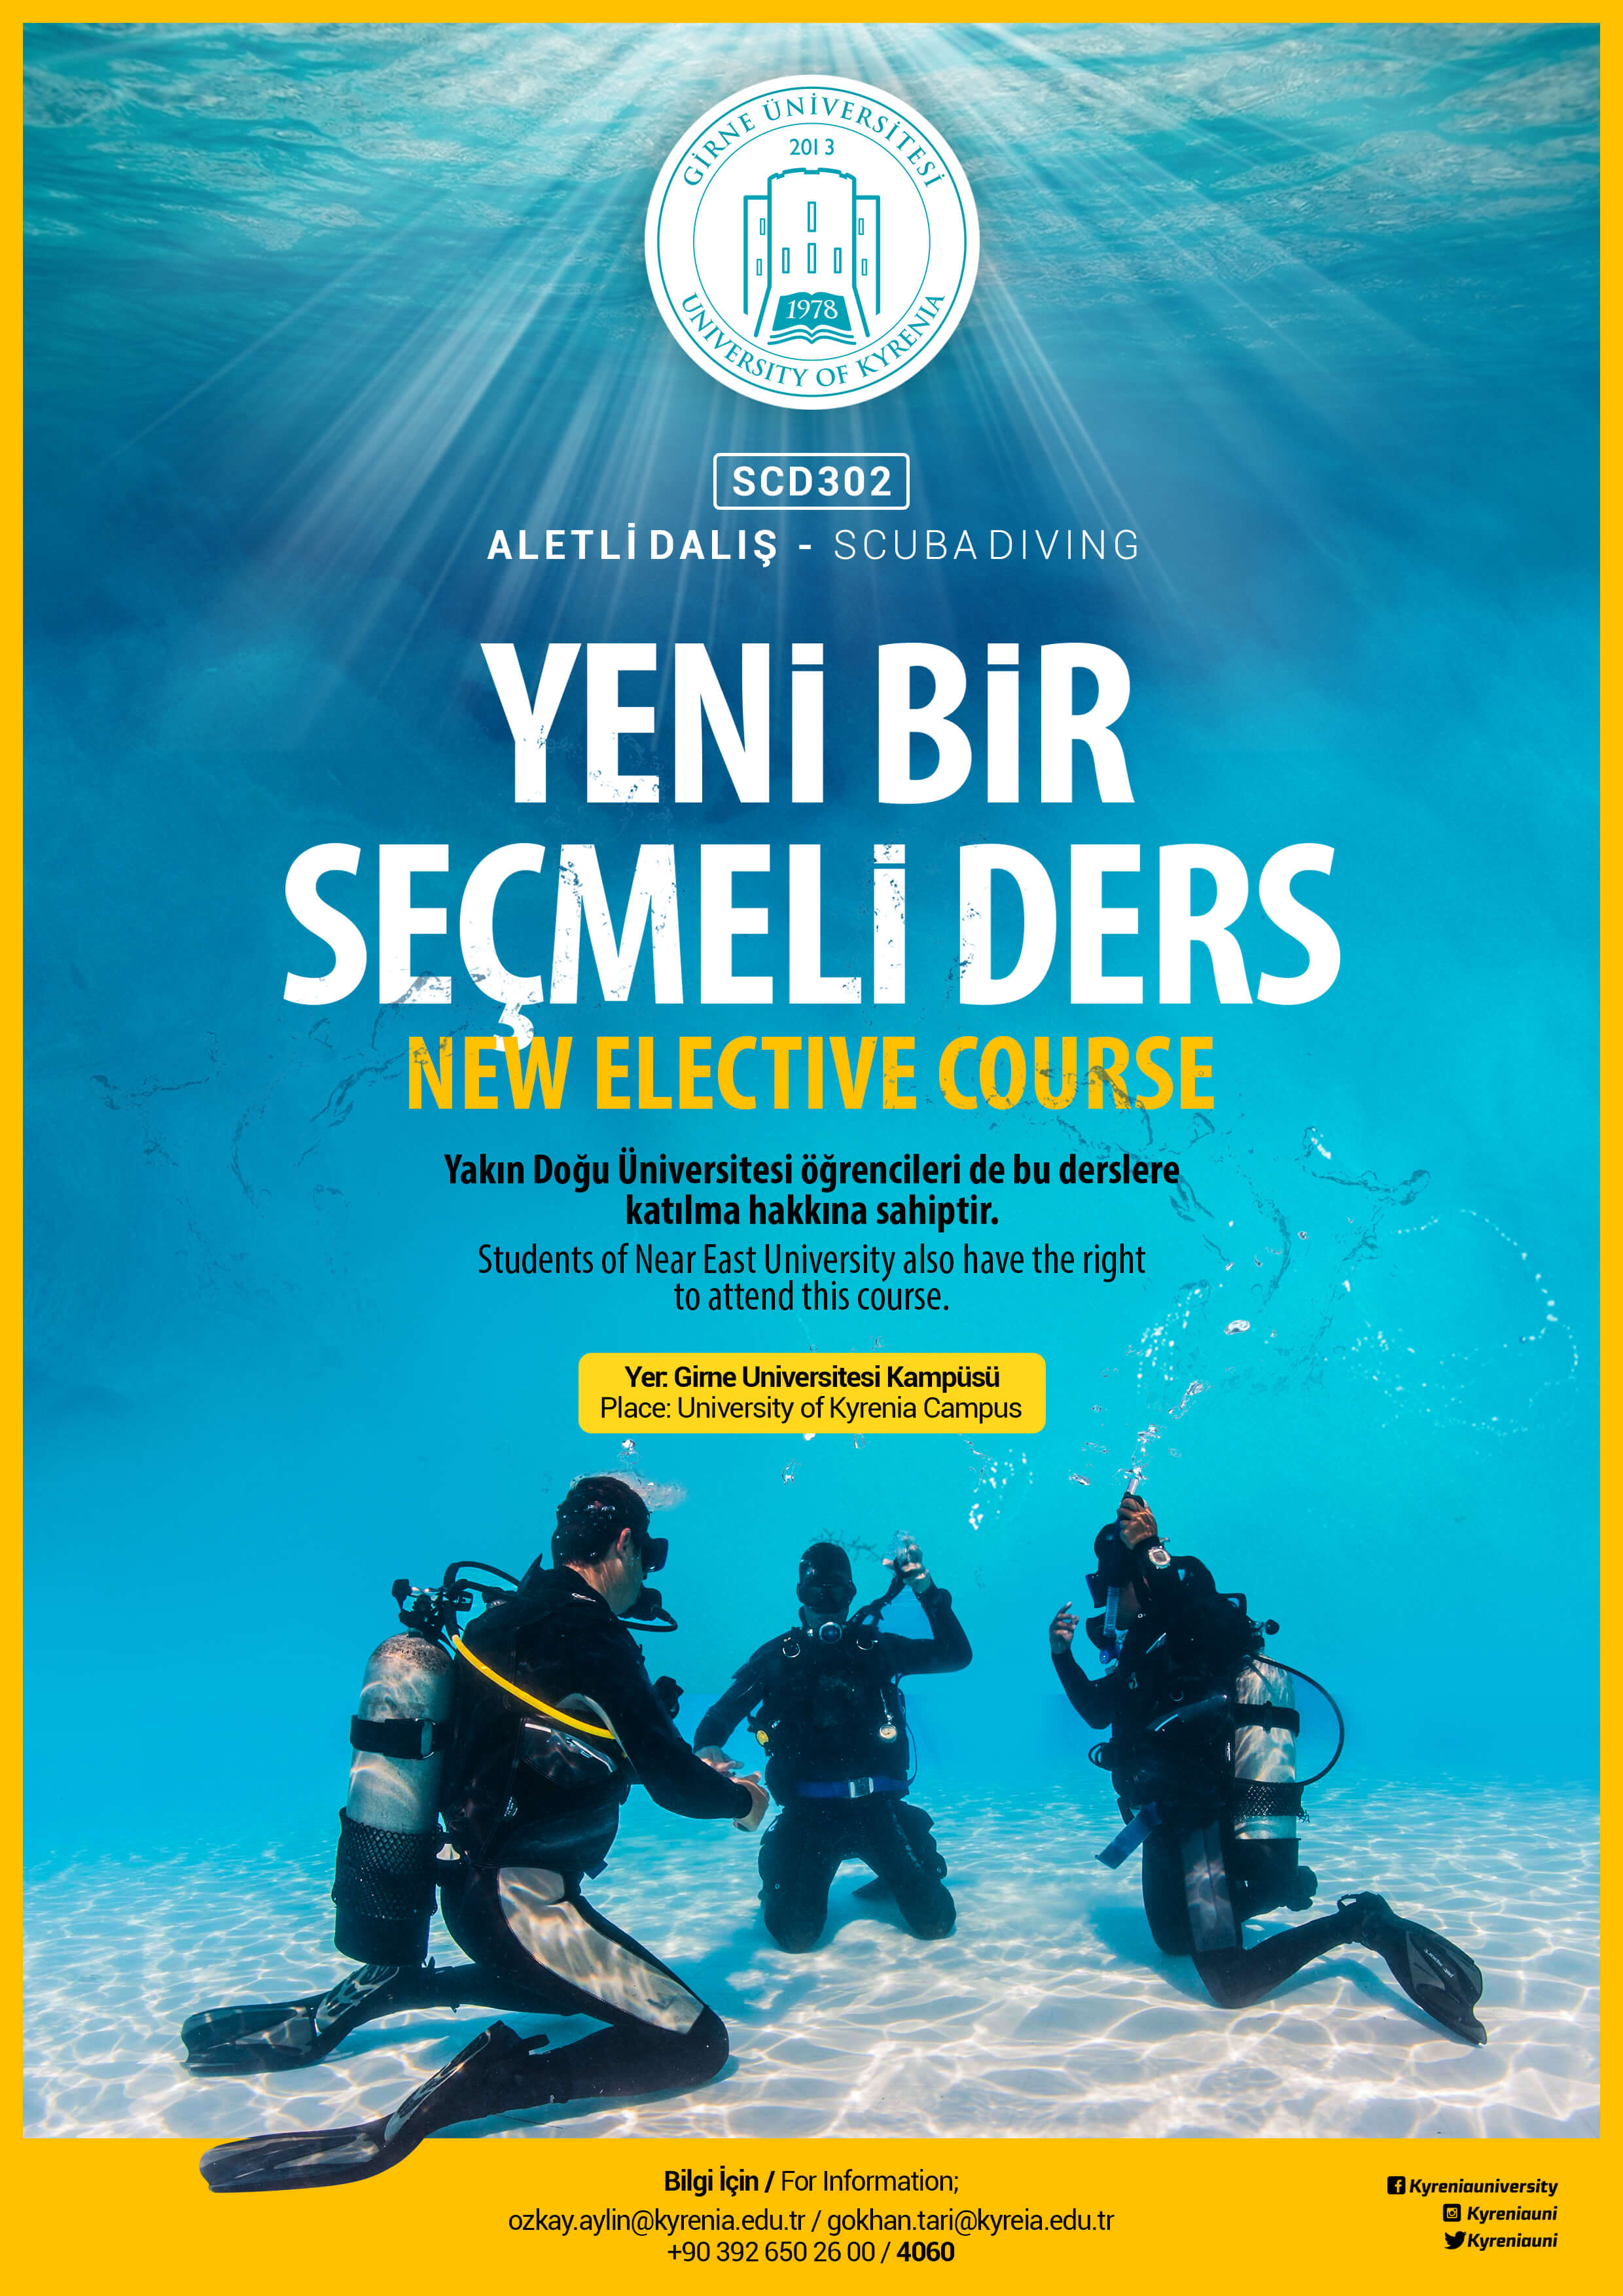 A New Elective Course is starting; Scuba Diving